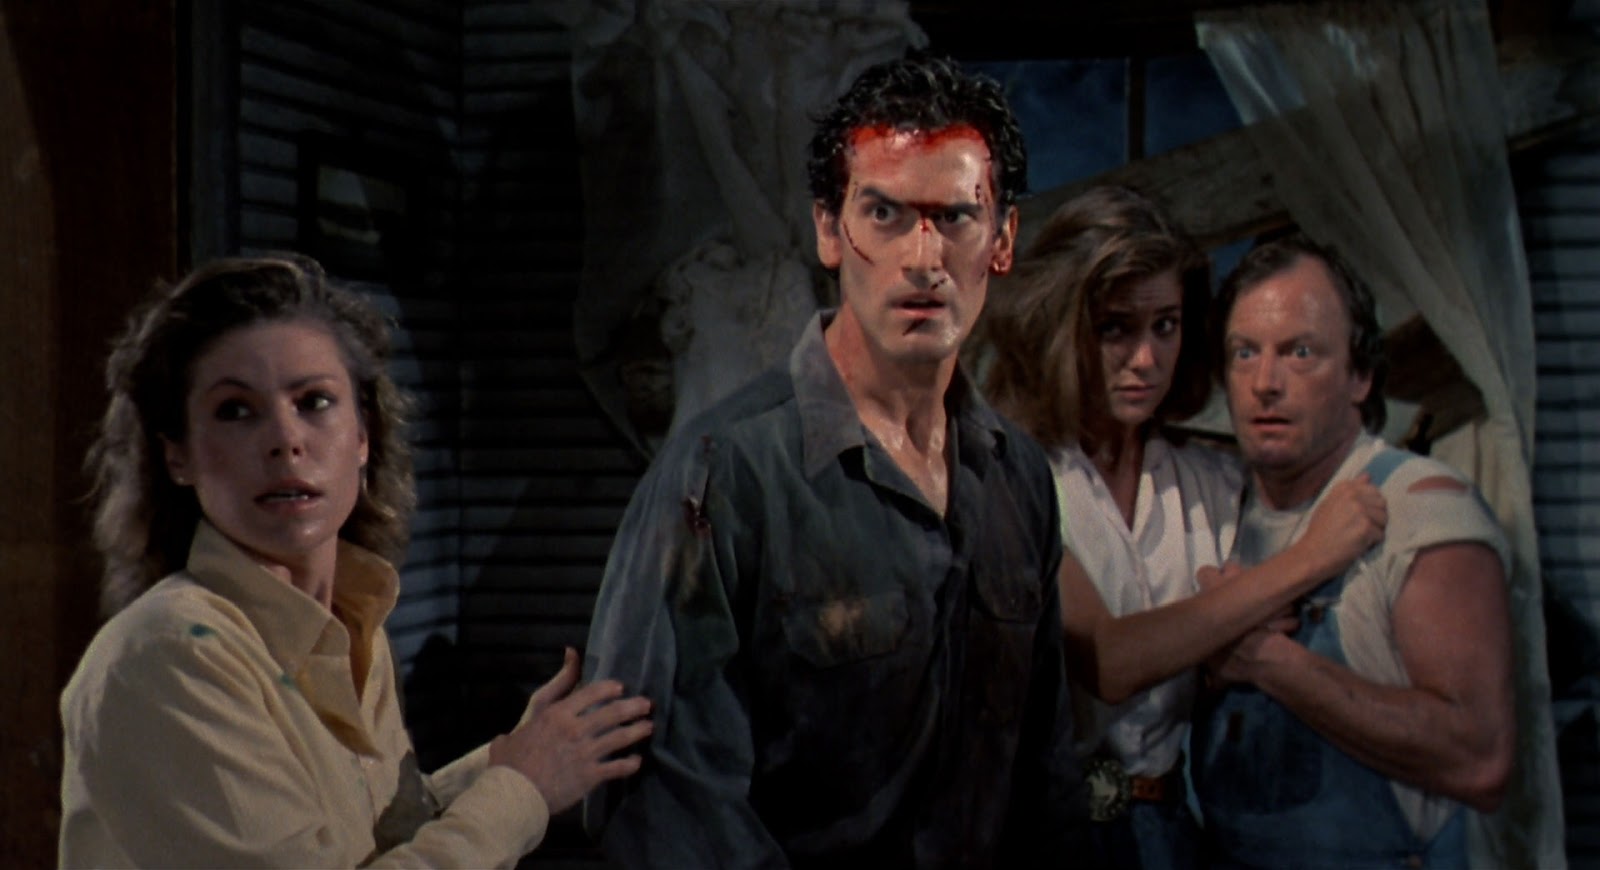 5 Reasons Why “Evil Dead 2” Is The Most Inventive Horror Movie